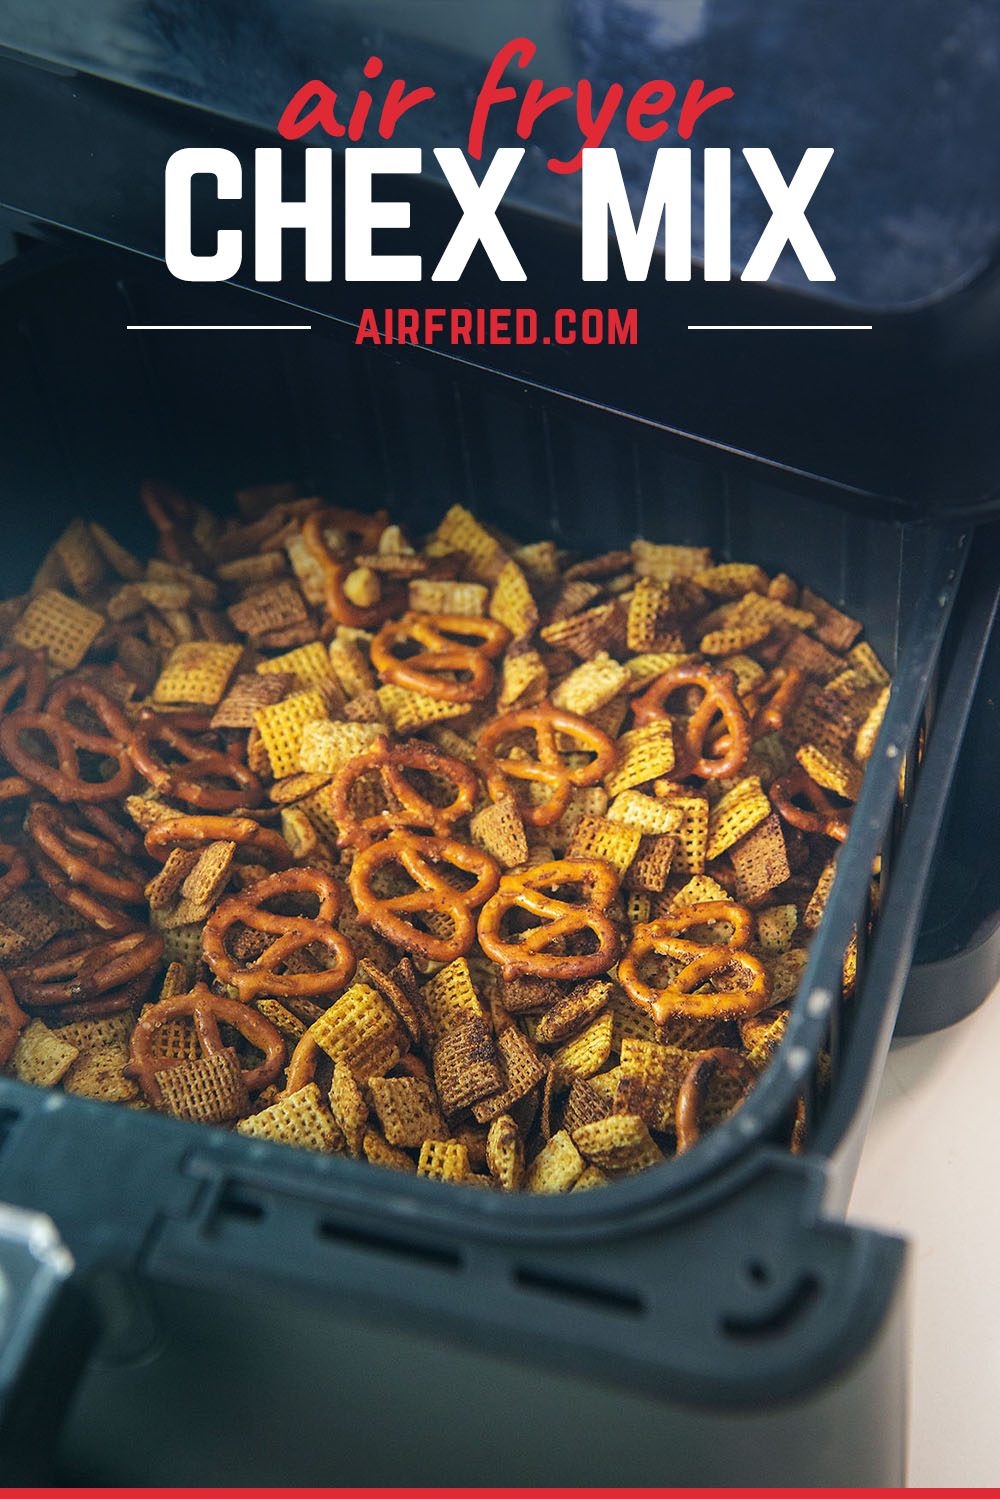 We used our air fryer to make a flavorful, traditional Chex mix!  Super easy, super yummy!